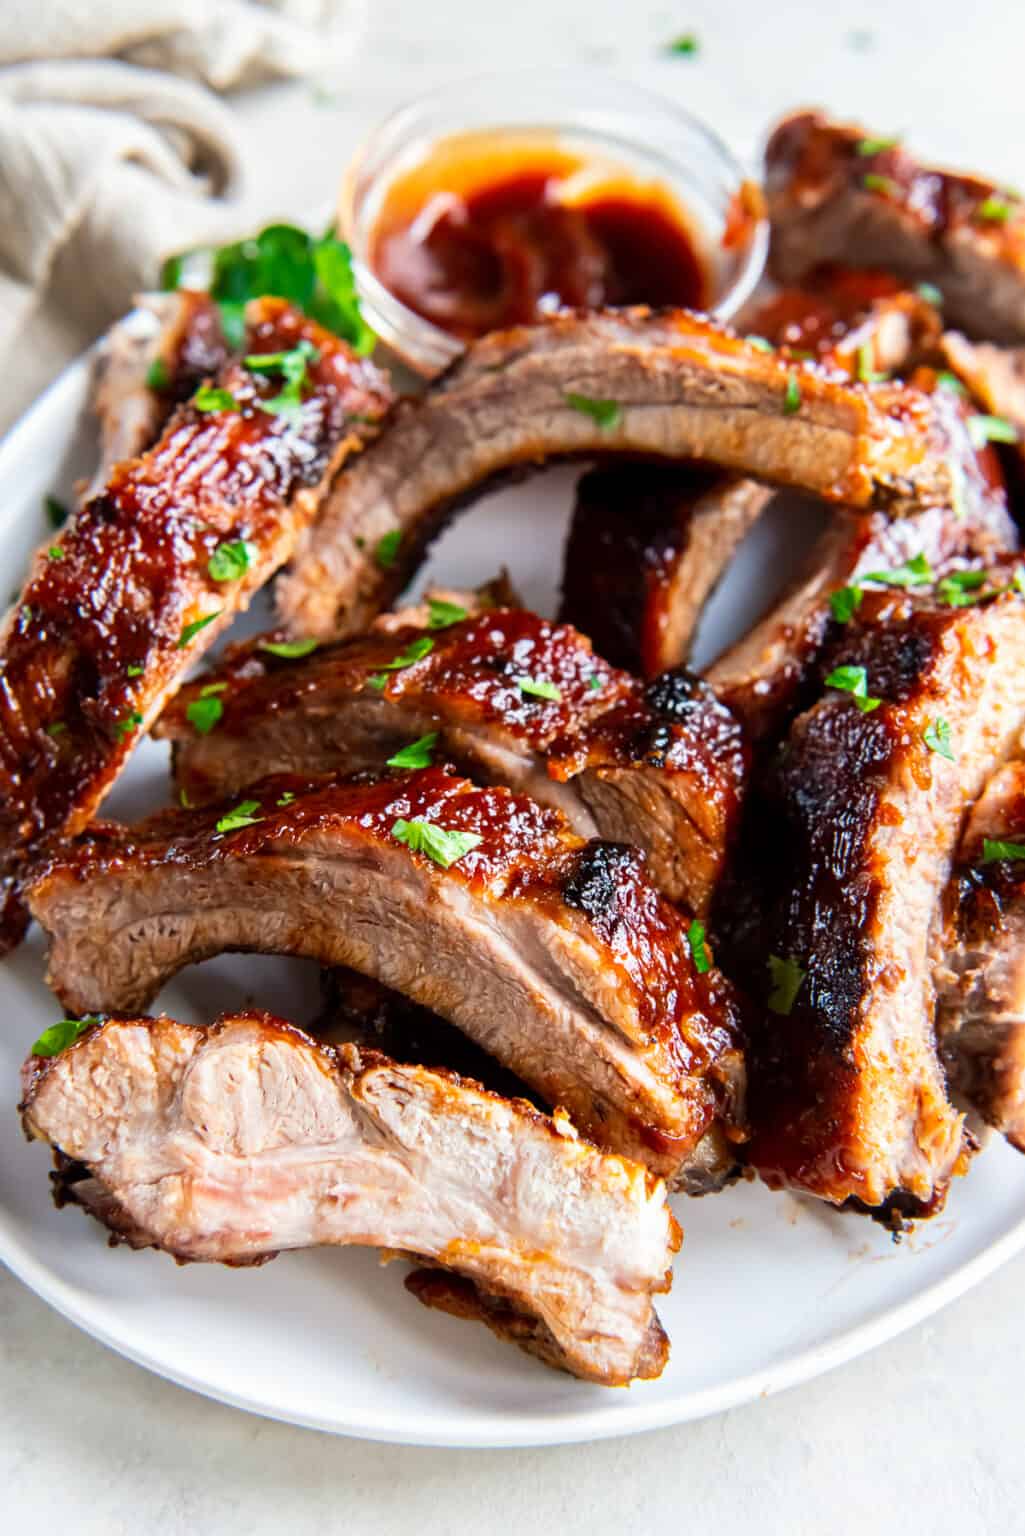 Oven Baked Baby Back Ribs | Valerie's Kitchen